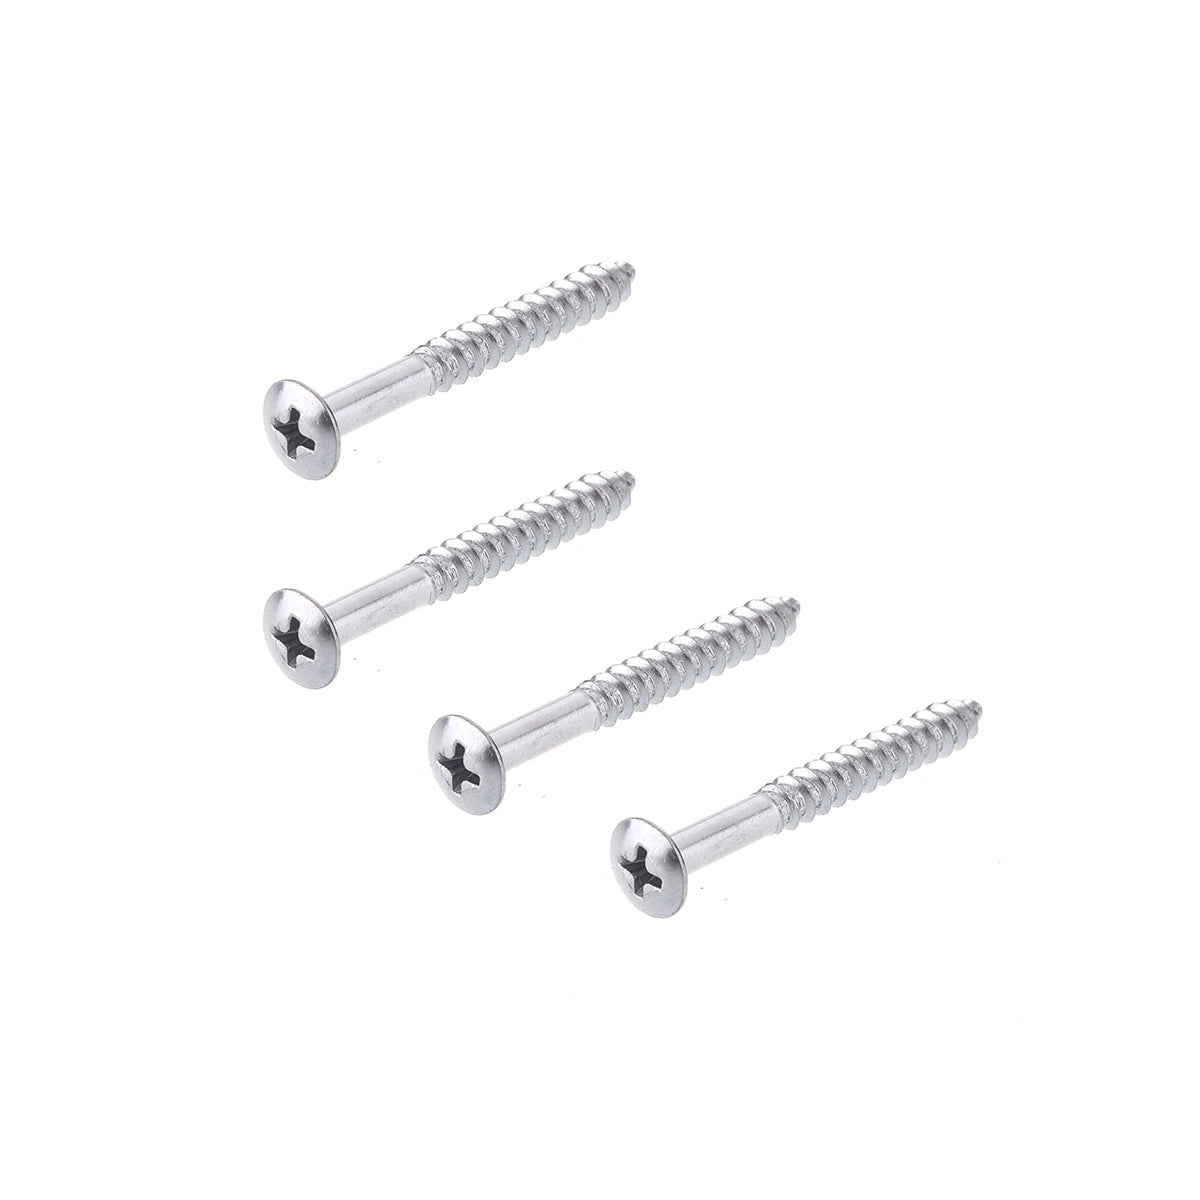 Musiclily 5x45mm Guitar Neck Plate Mounting Screws,Chrome( 8 Pieces)